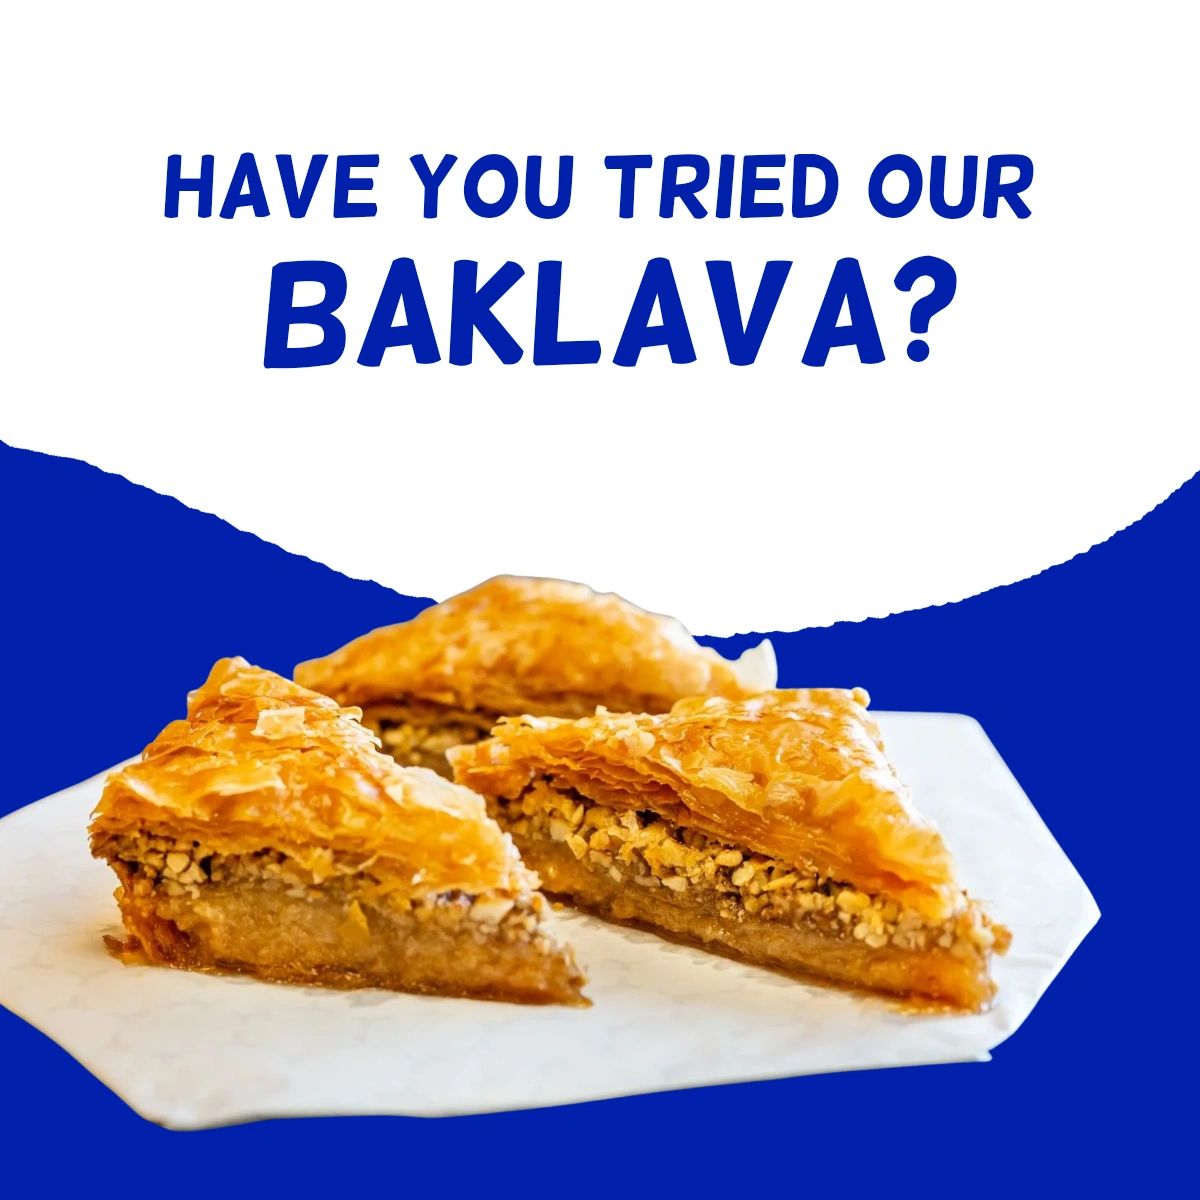 No meal at our place is complete without something sweet! If you haven’t tried our #baklava before, we highly recommend ordering some the next time you visit. #StLGyros #EatLocal #ShopSmall #ChickenGyro #StLGram #StL #StLouis #StLFood #Do314 #YelpStL #RiverFrontTimes #ExploreStL